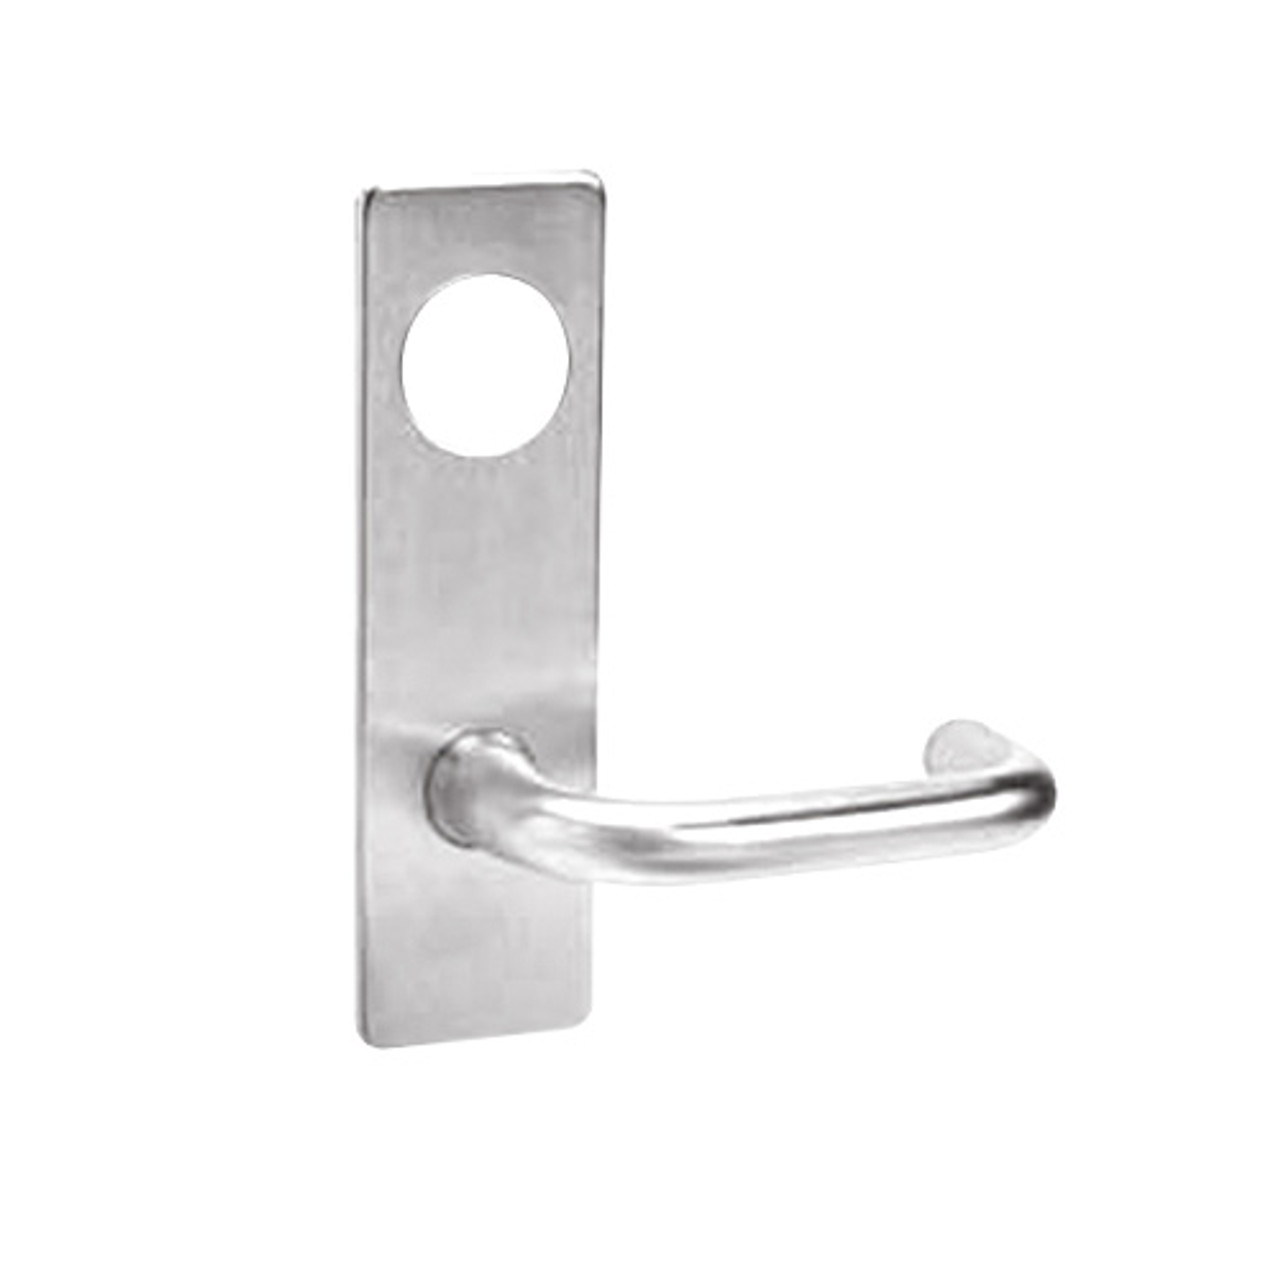 ML2054-LWM-629-M31 Corbin Russwin ML2000 Series Mortise Entrance Trim Pack with Lustra Lever in Bright Stainless Steel